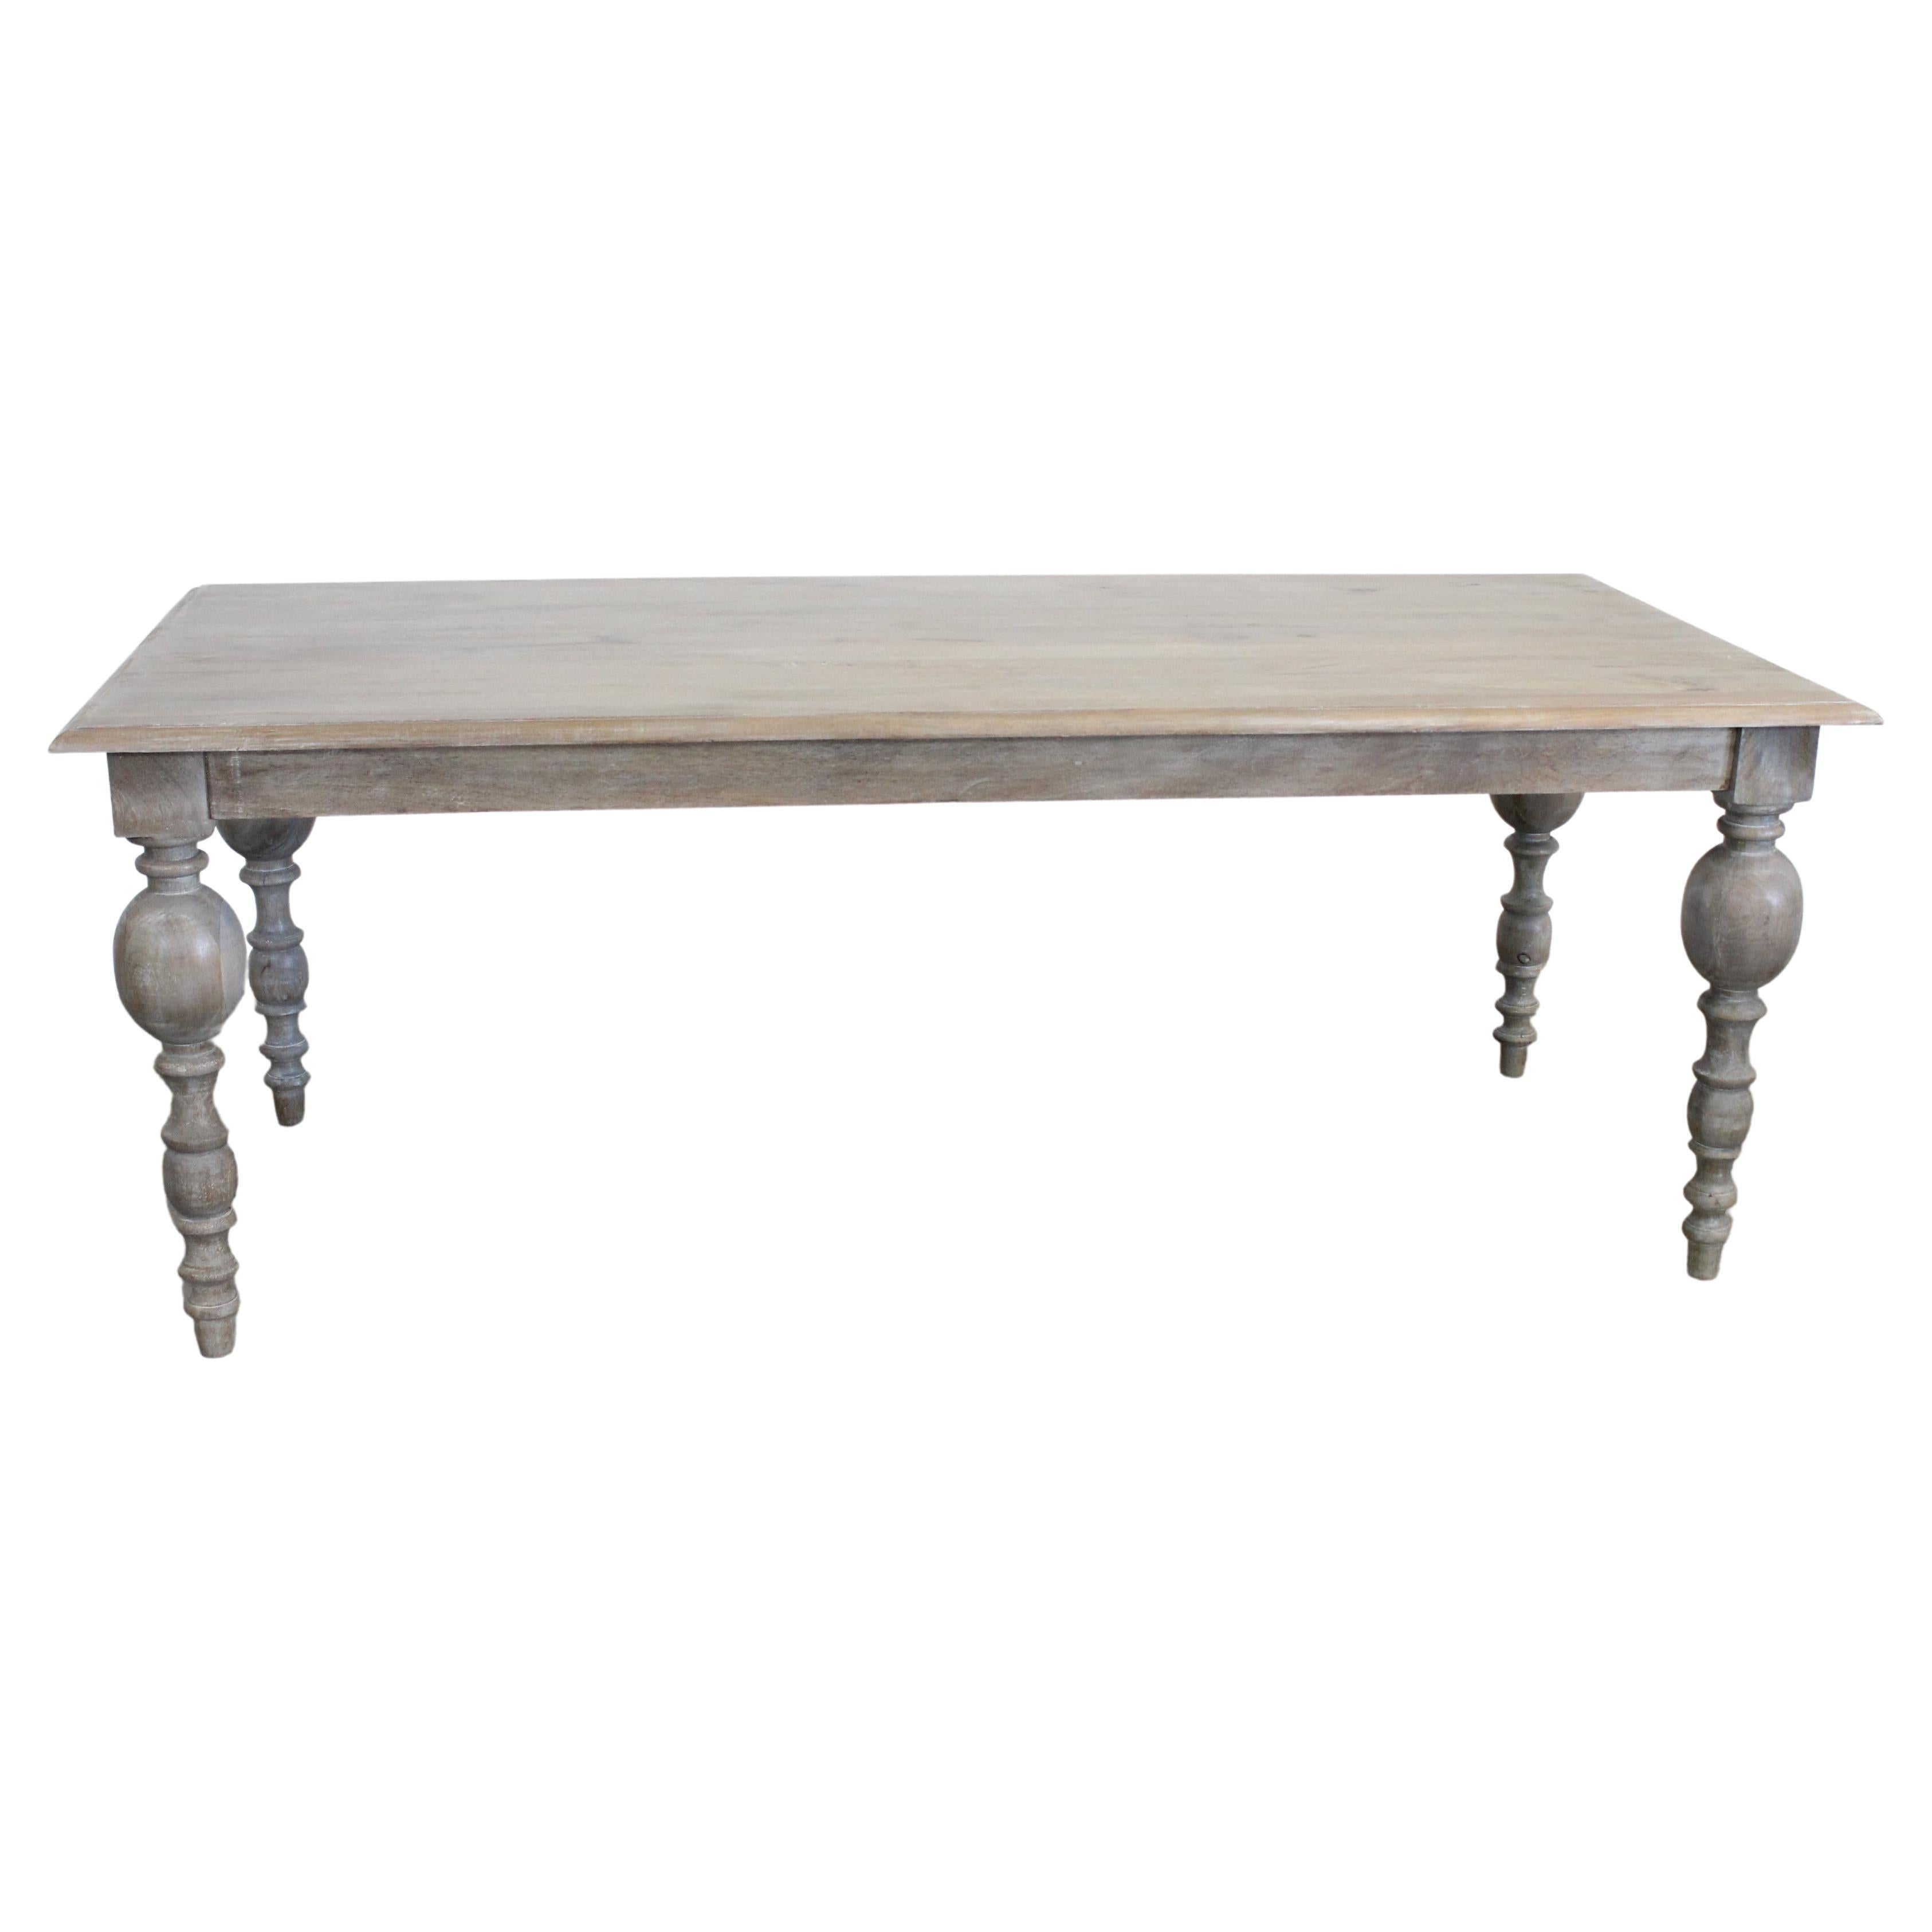 French Country Rustic Gray 72" Farm Dining Table